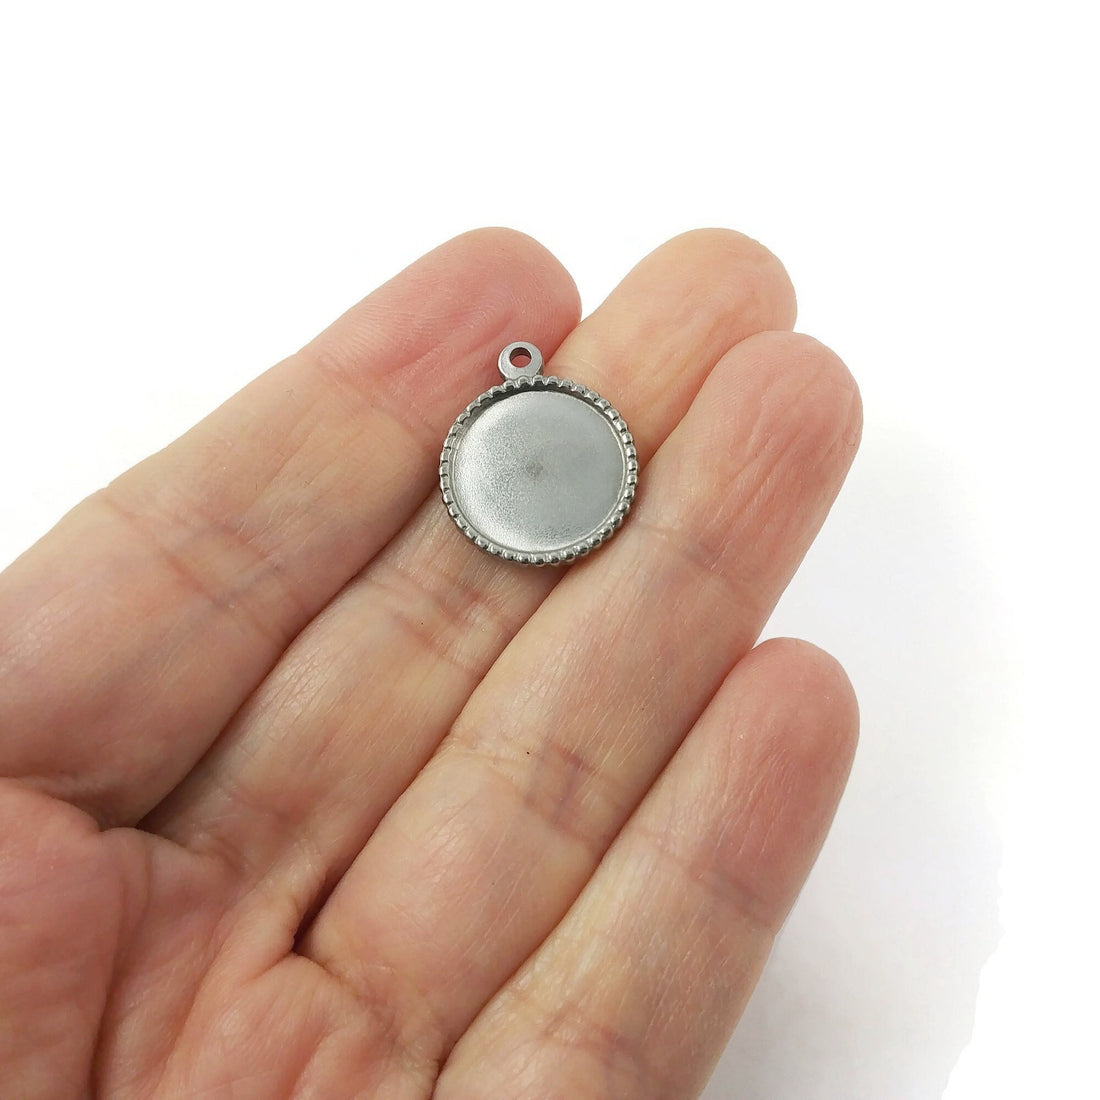 Stainless steel pendant cabochon settings, 14mm tray bezel for necklace making